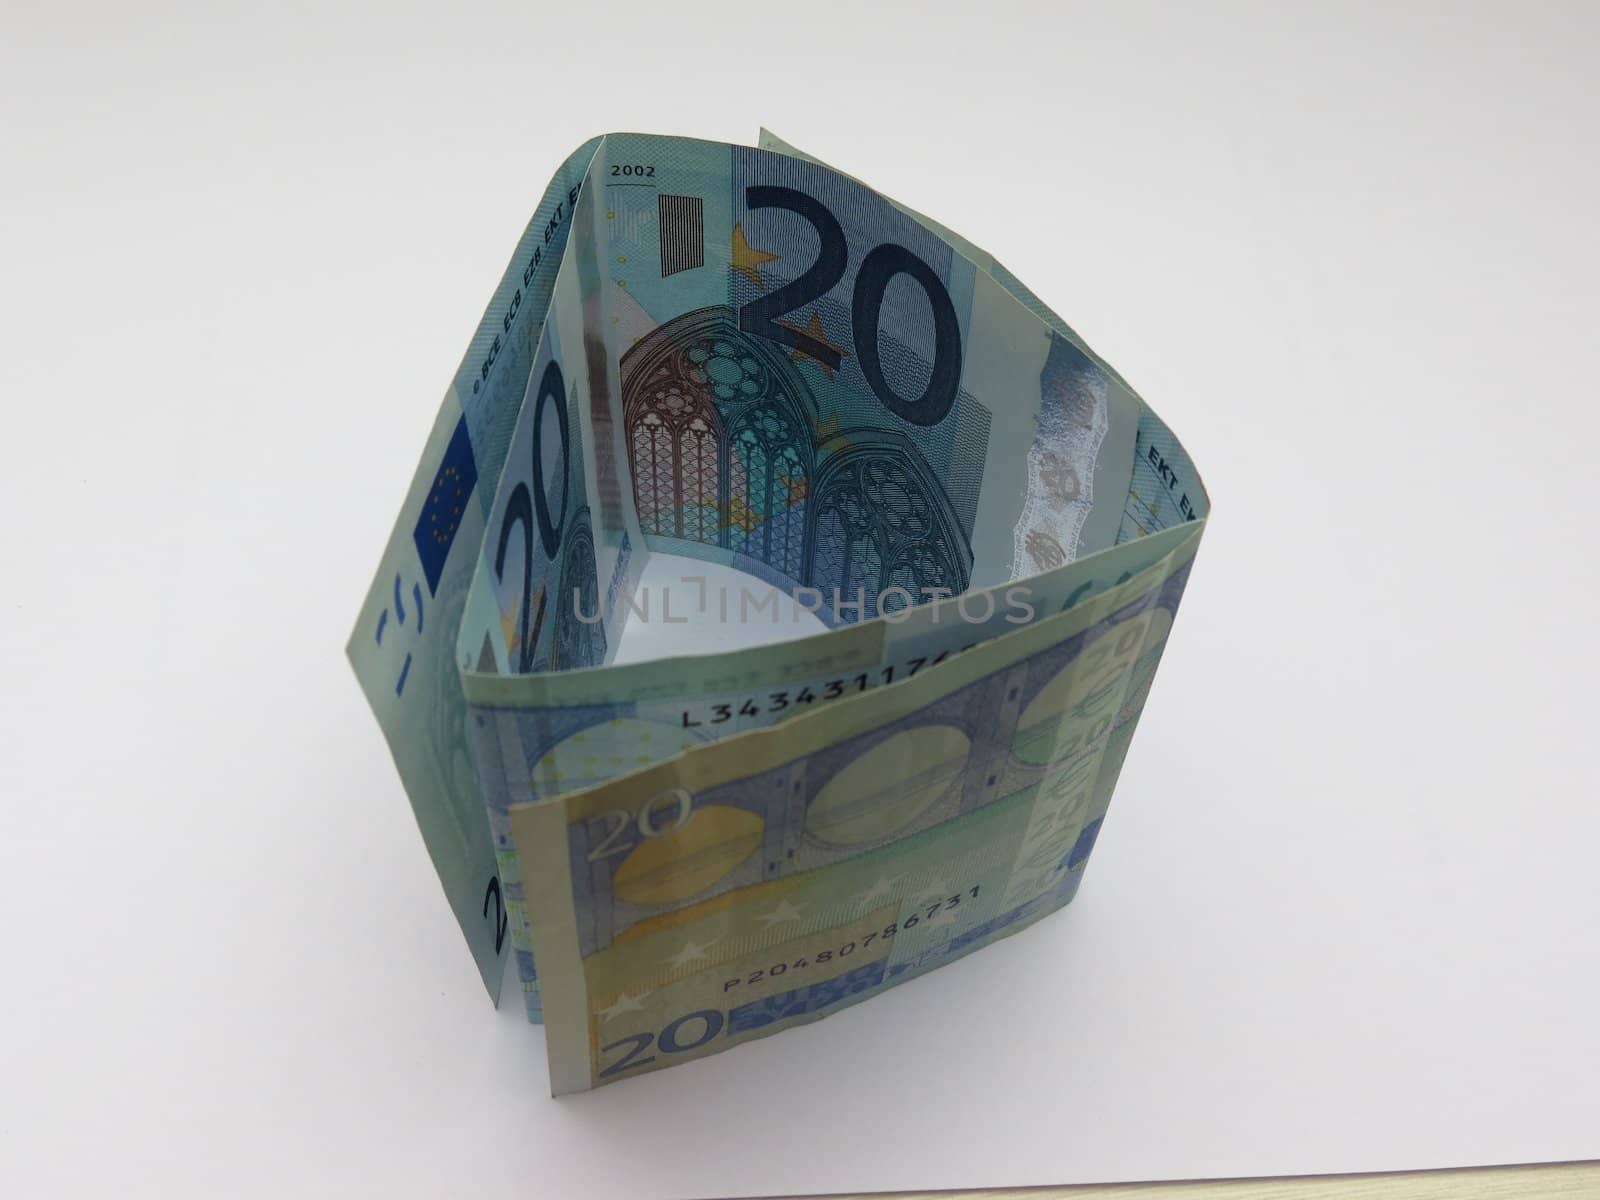 Euro banknotes by paolo77